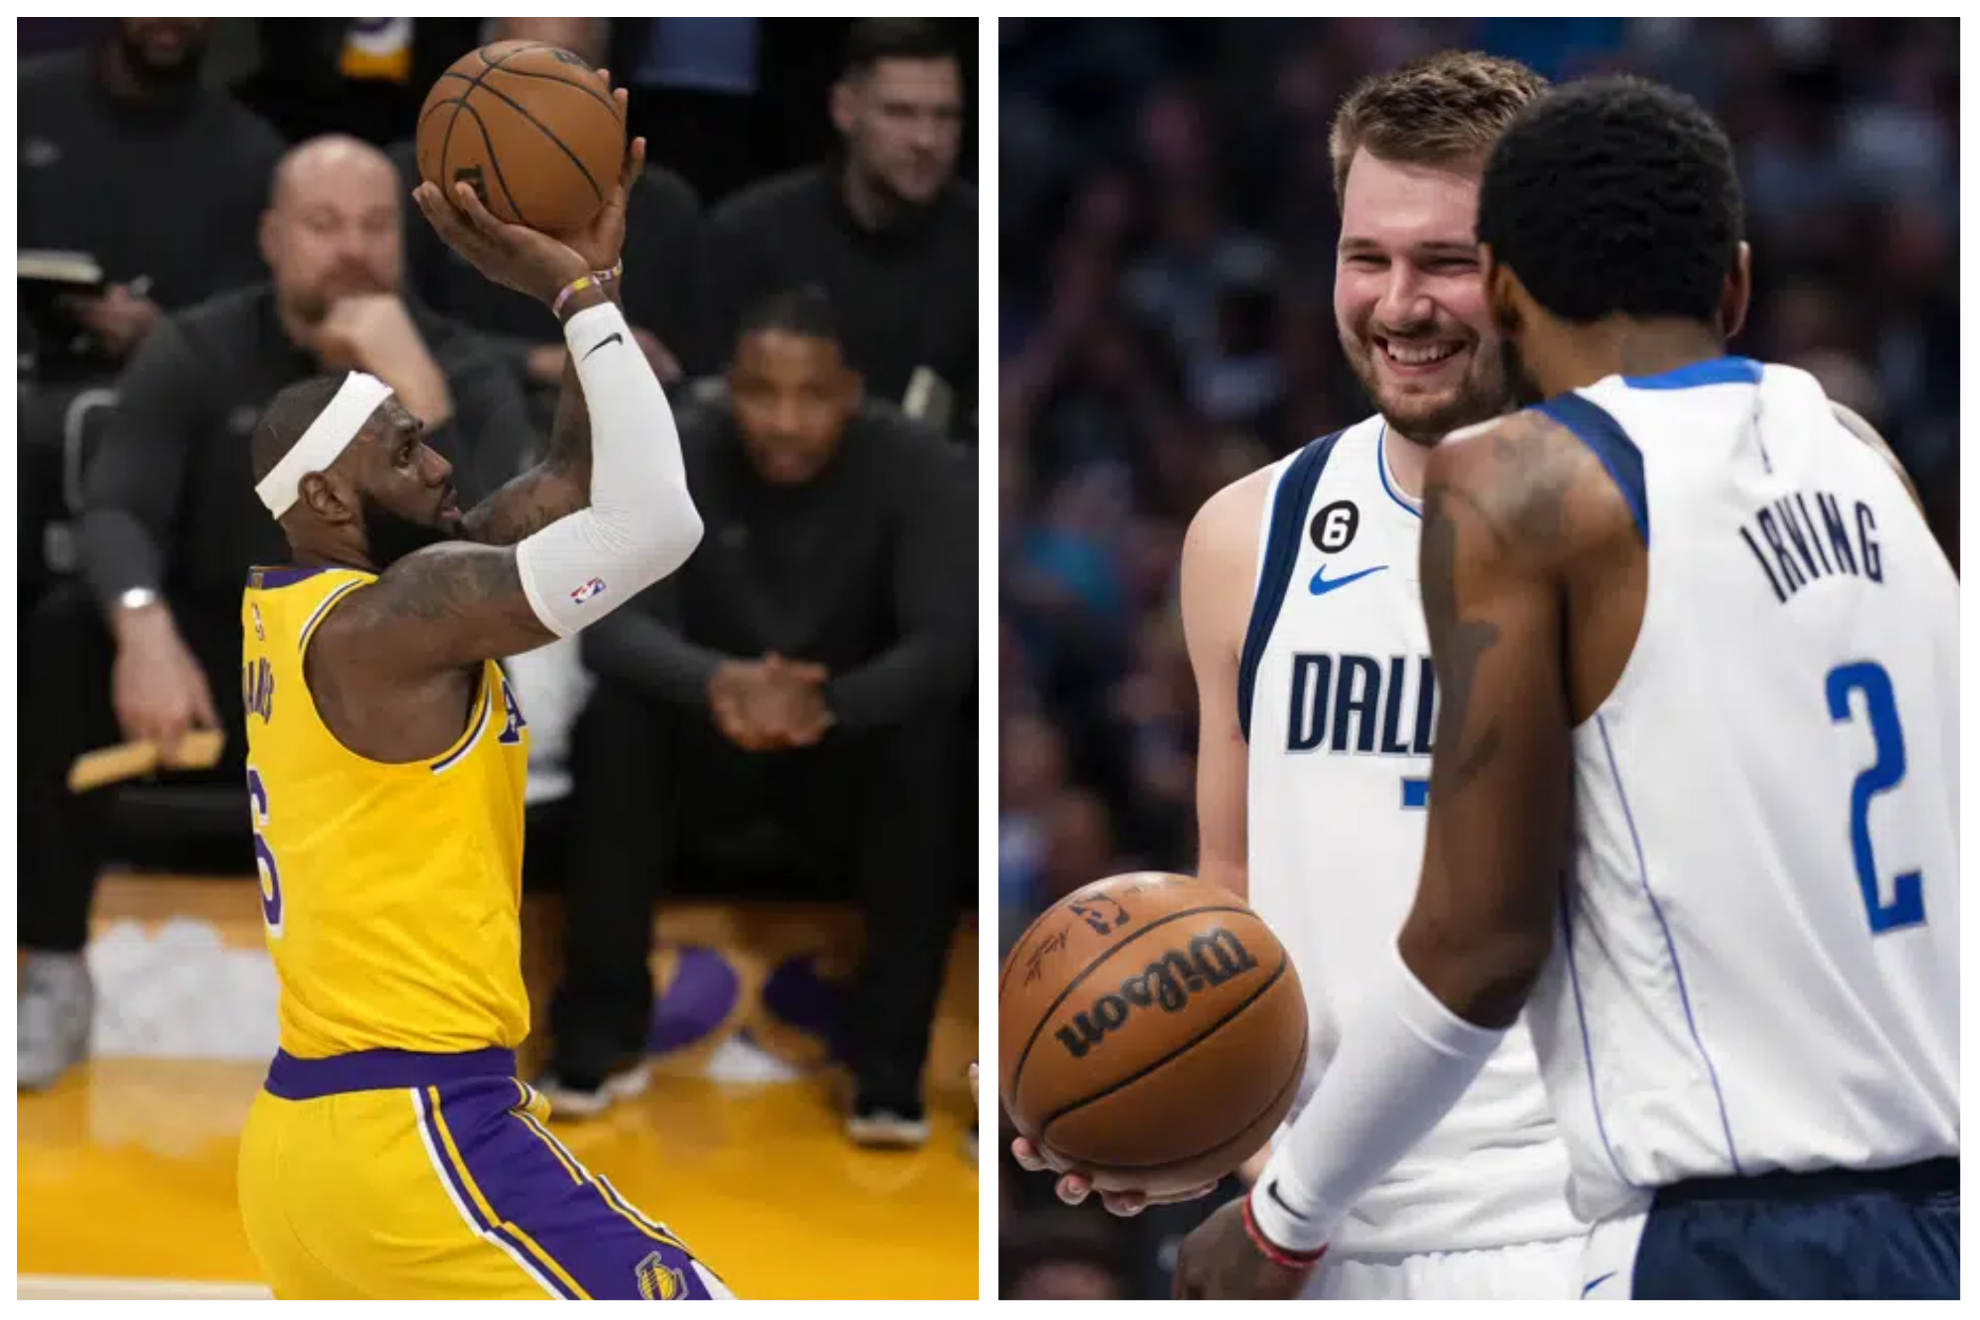 LeBron James and the Los Angeles Lakers will visit the Dallas Mavericks to face Luka Doncic and Kyrie Irving.